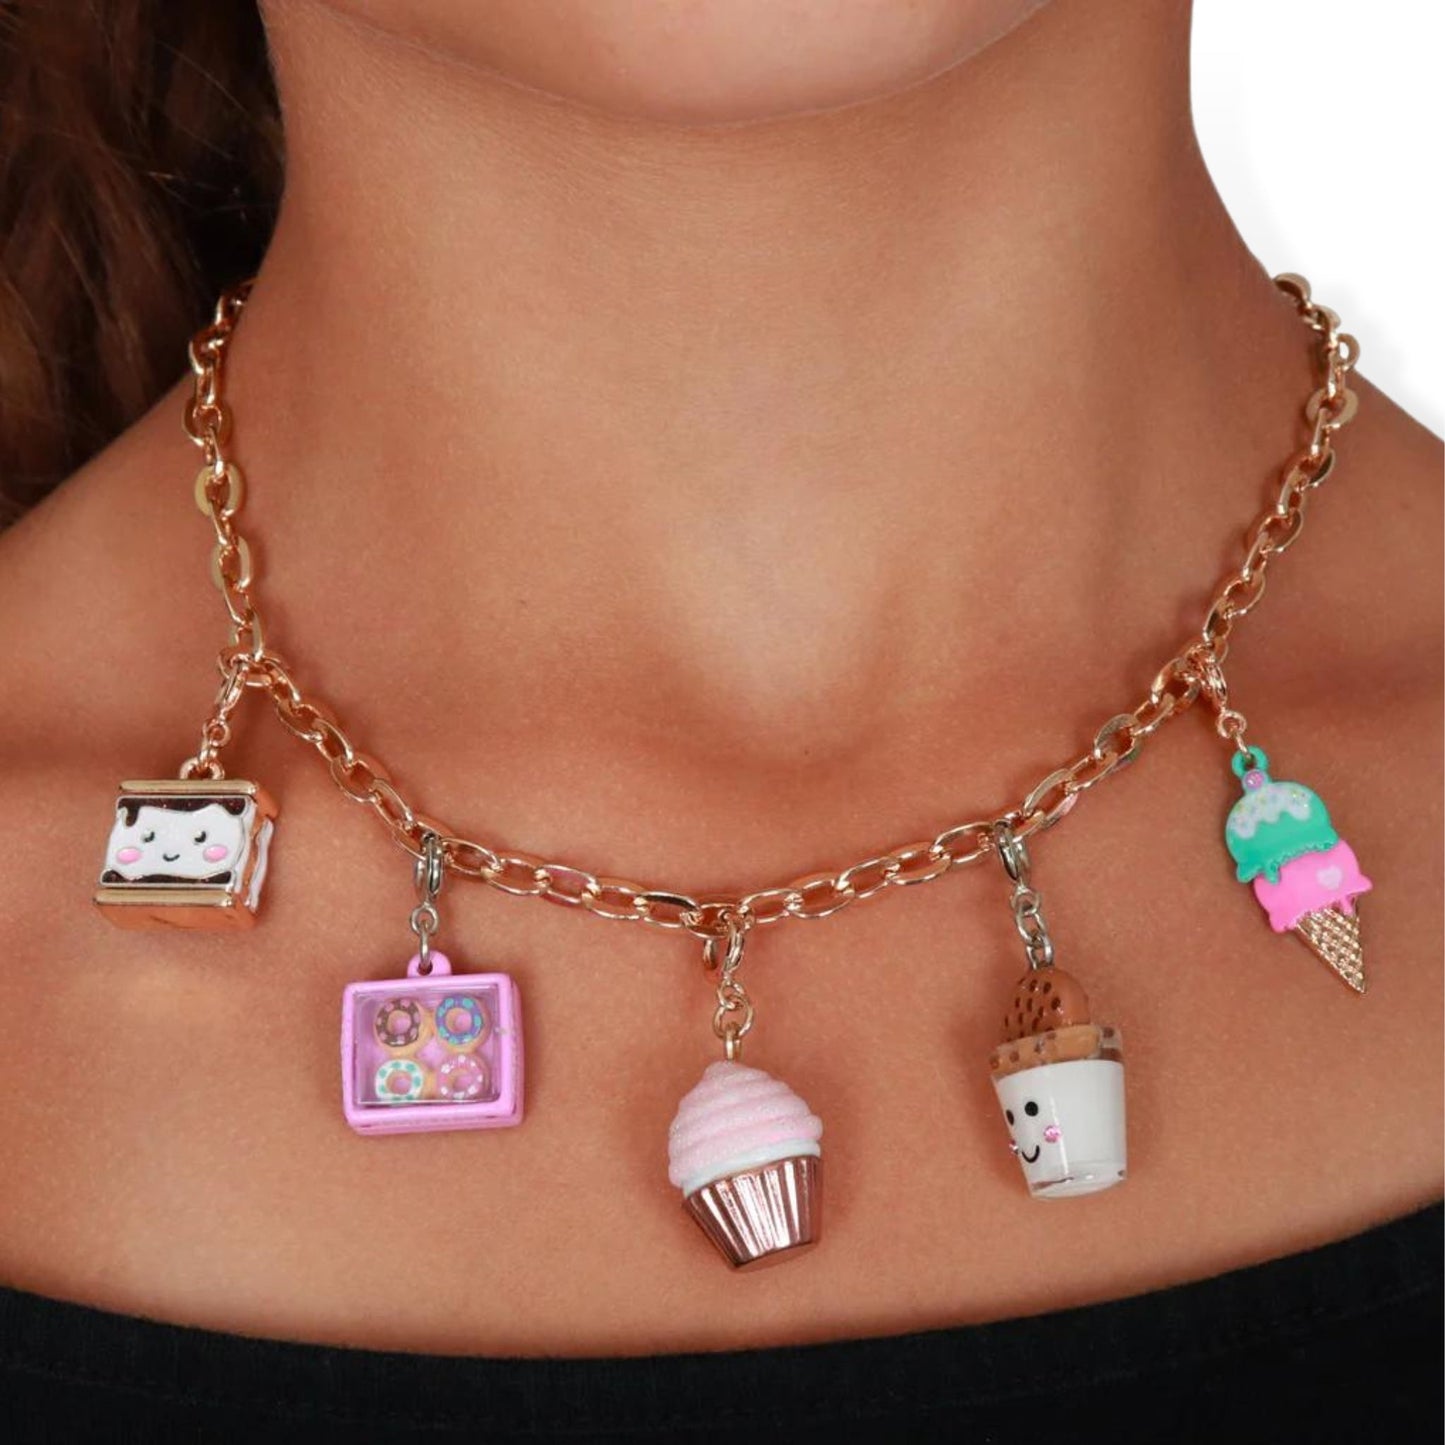 Charm it! Milk and Cookies Charm - a Spirit Animal - Charms accessories active September 2023 Charm it!